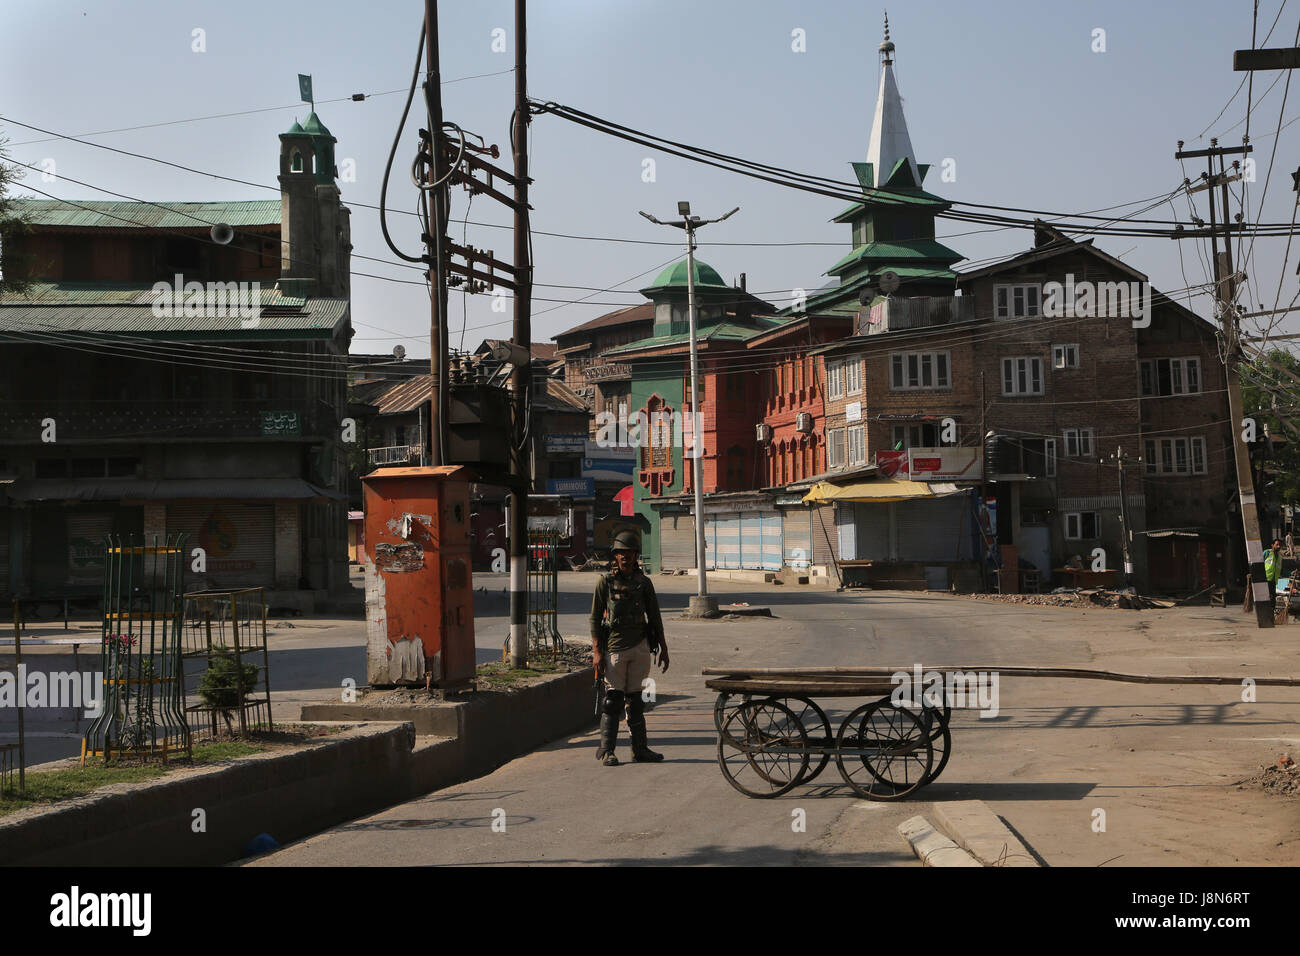 Srinagar, Kashmir. 30th May, 2017. An Indian paramilitary trooper stands guard on a road during curfew-like restrictions in downtown Srinagar, summer capital of Kashmir, May 30, 2017. Curfew-like restrictions have been imposed in several areas of Srinagar to prevent protests and clashes. Credit: Javed Dar/Xinhua/Alamy Live News Stock Photo